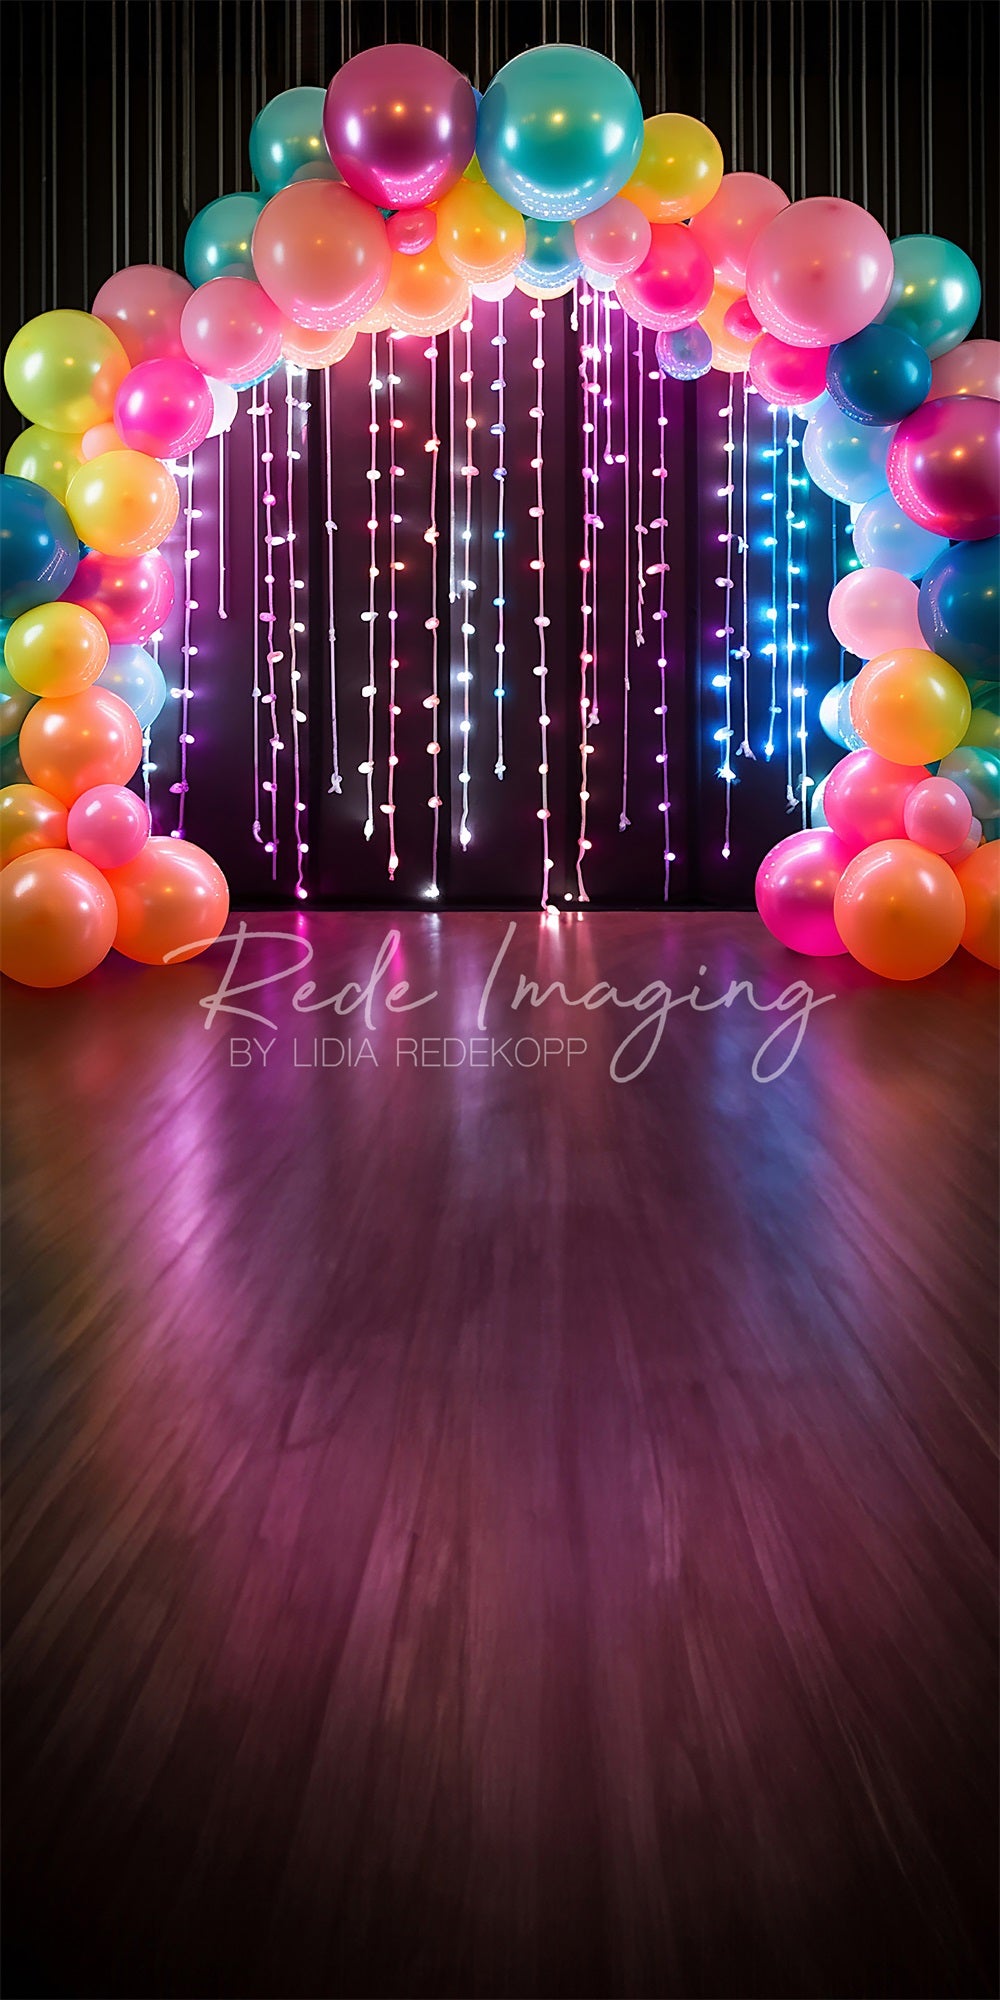 Kate Sweep Cool Birthday Cake Smash Neon Lights Colorful Balloon Arch Backdrop Designed by Lidia Redekopp